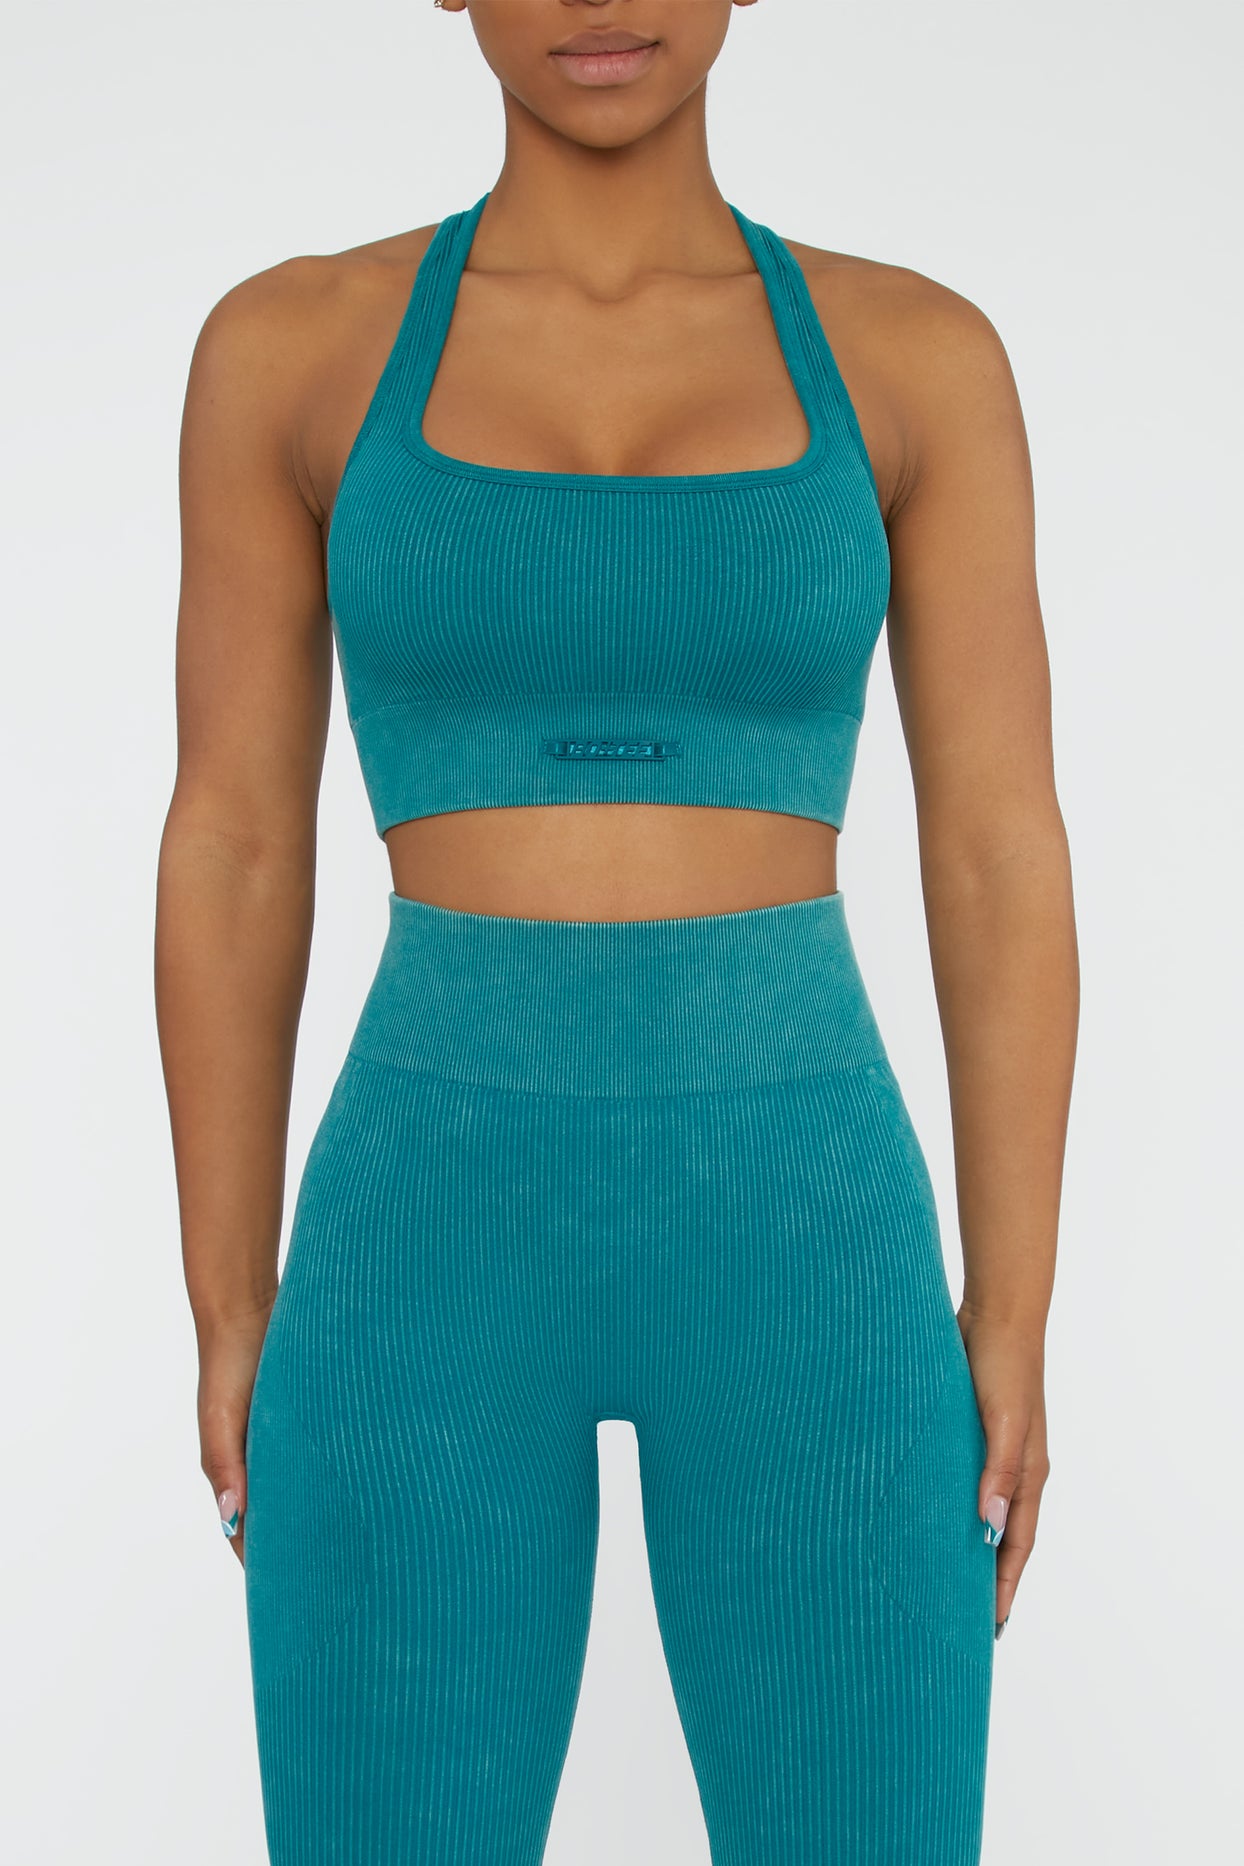 Iconic Square Neck Sports Bra in Teal